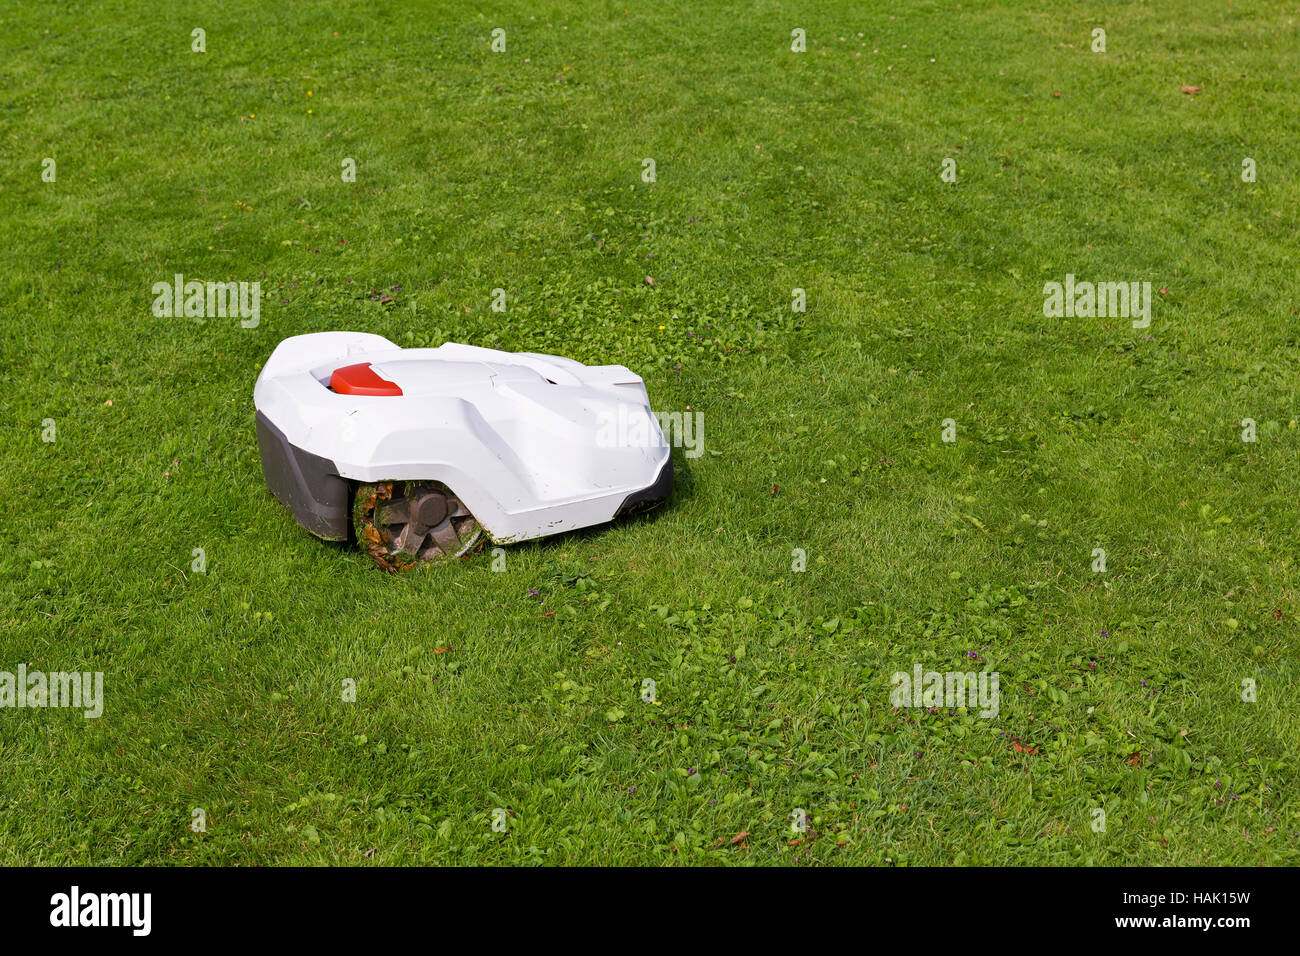 robotic lawn mower working on green grass Stock Photo